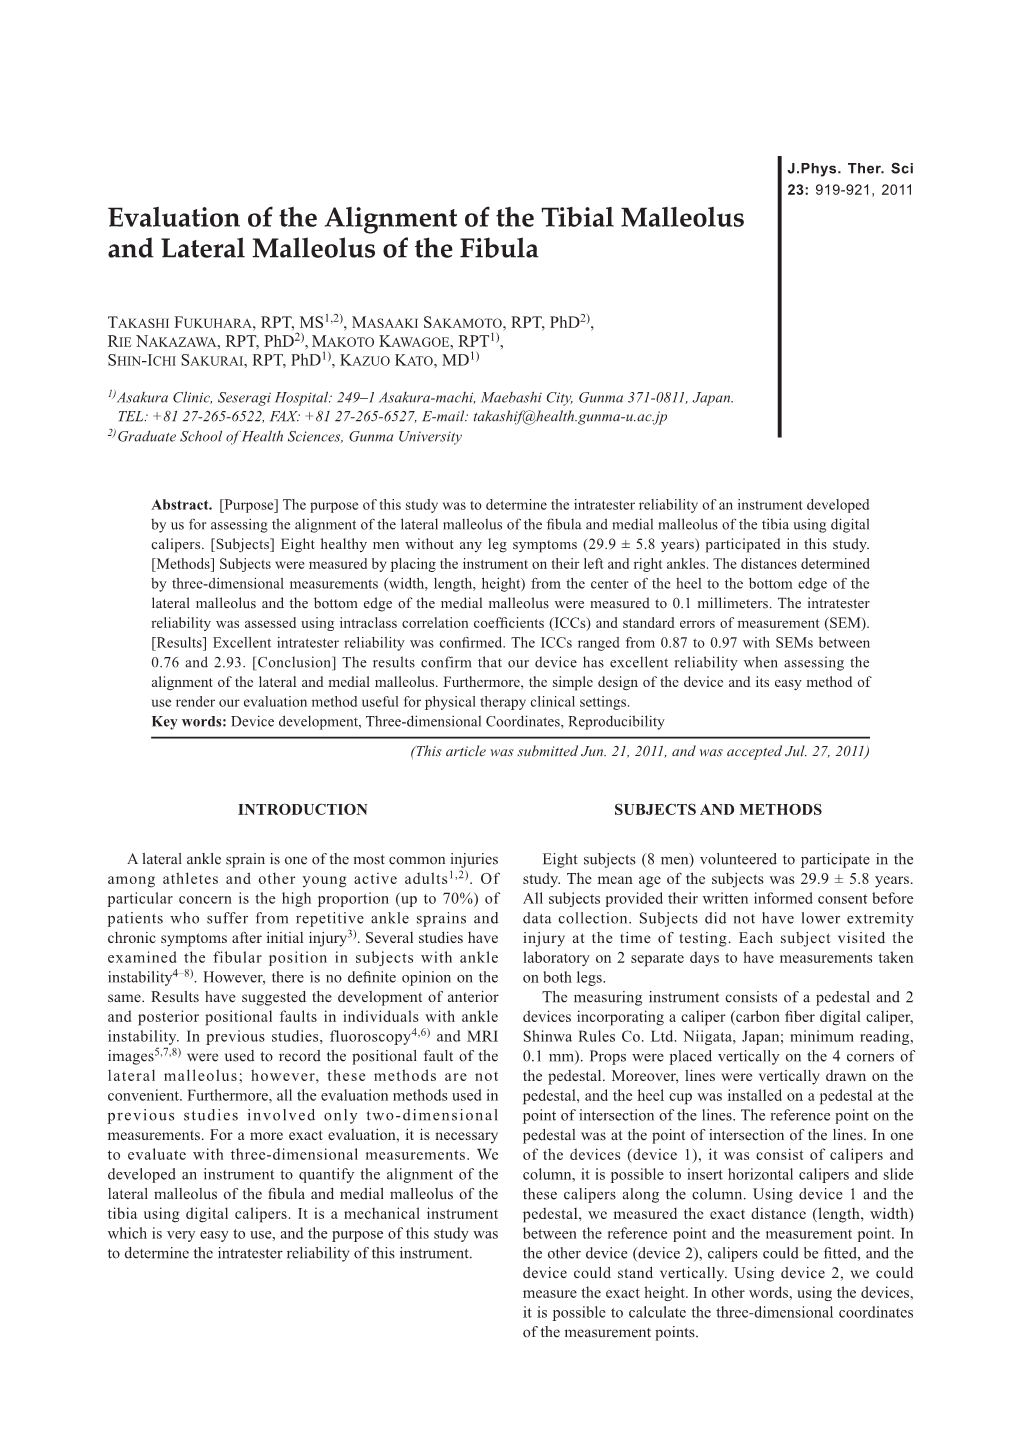 Evaluation of the Alignment of the Tibial Malleolus and Lateral Malleolus of the Fibula